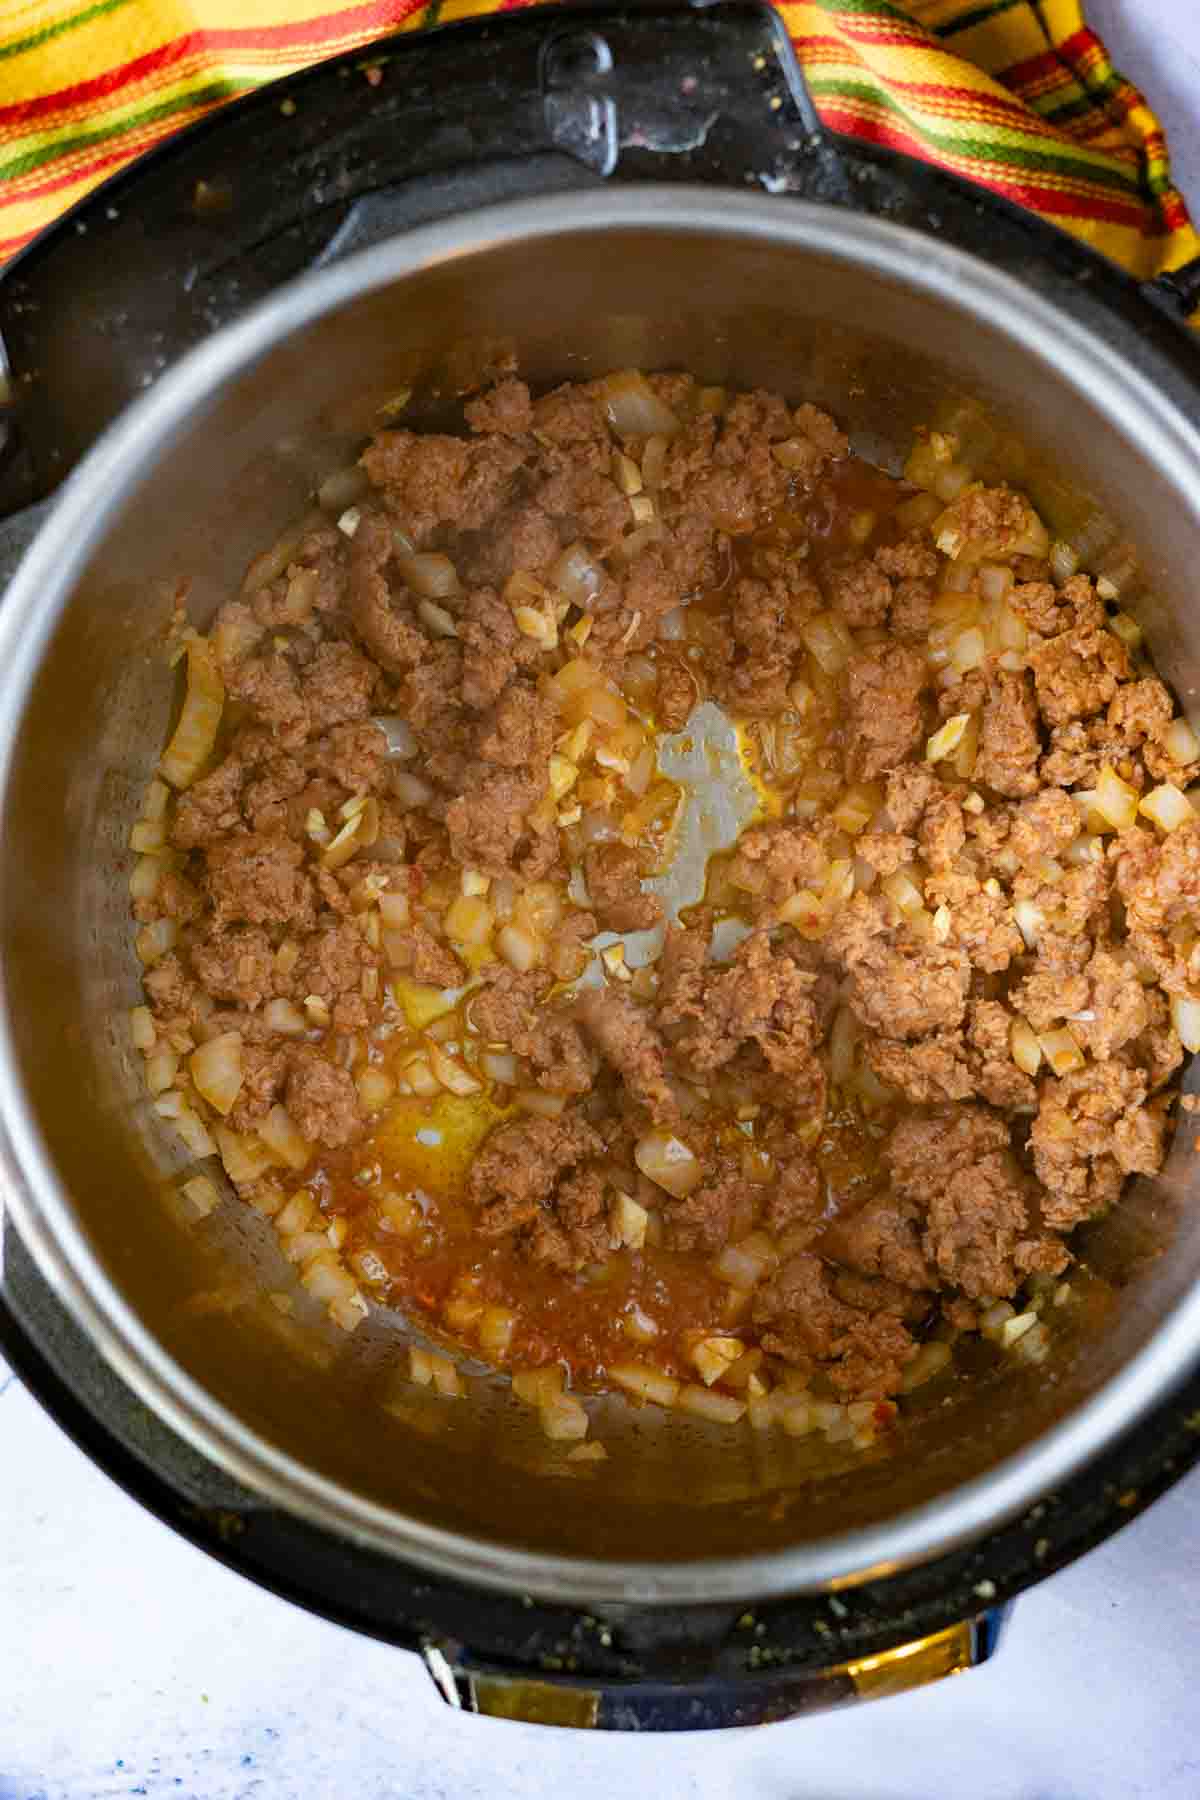 Cooking chorizo sausage in the instant pot.